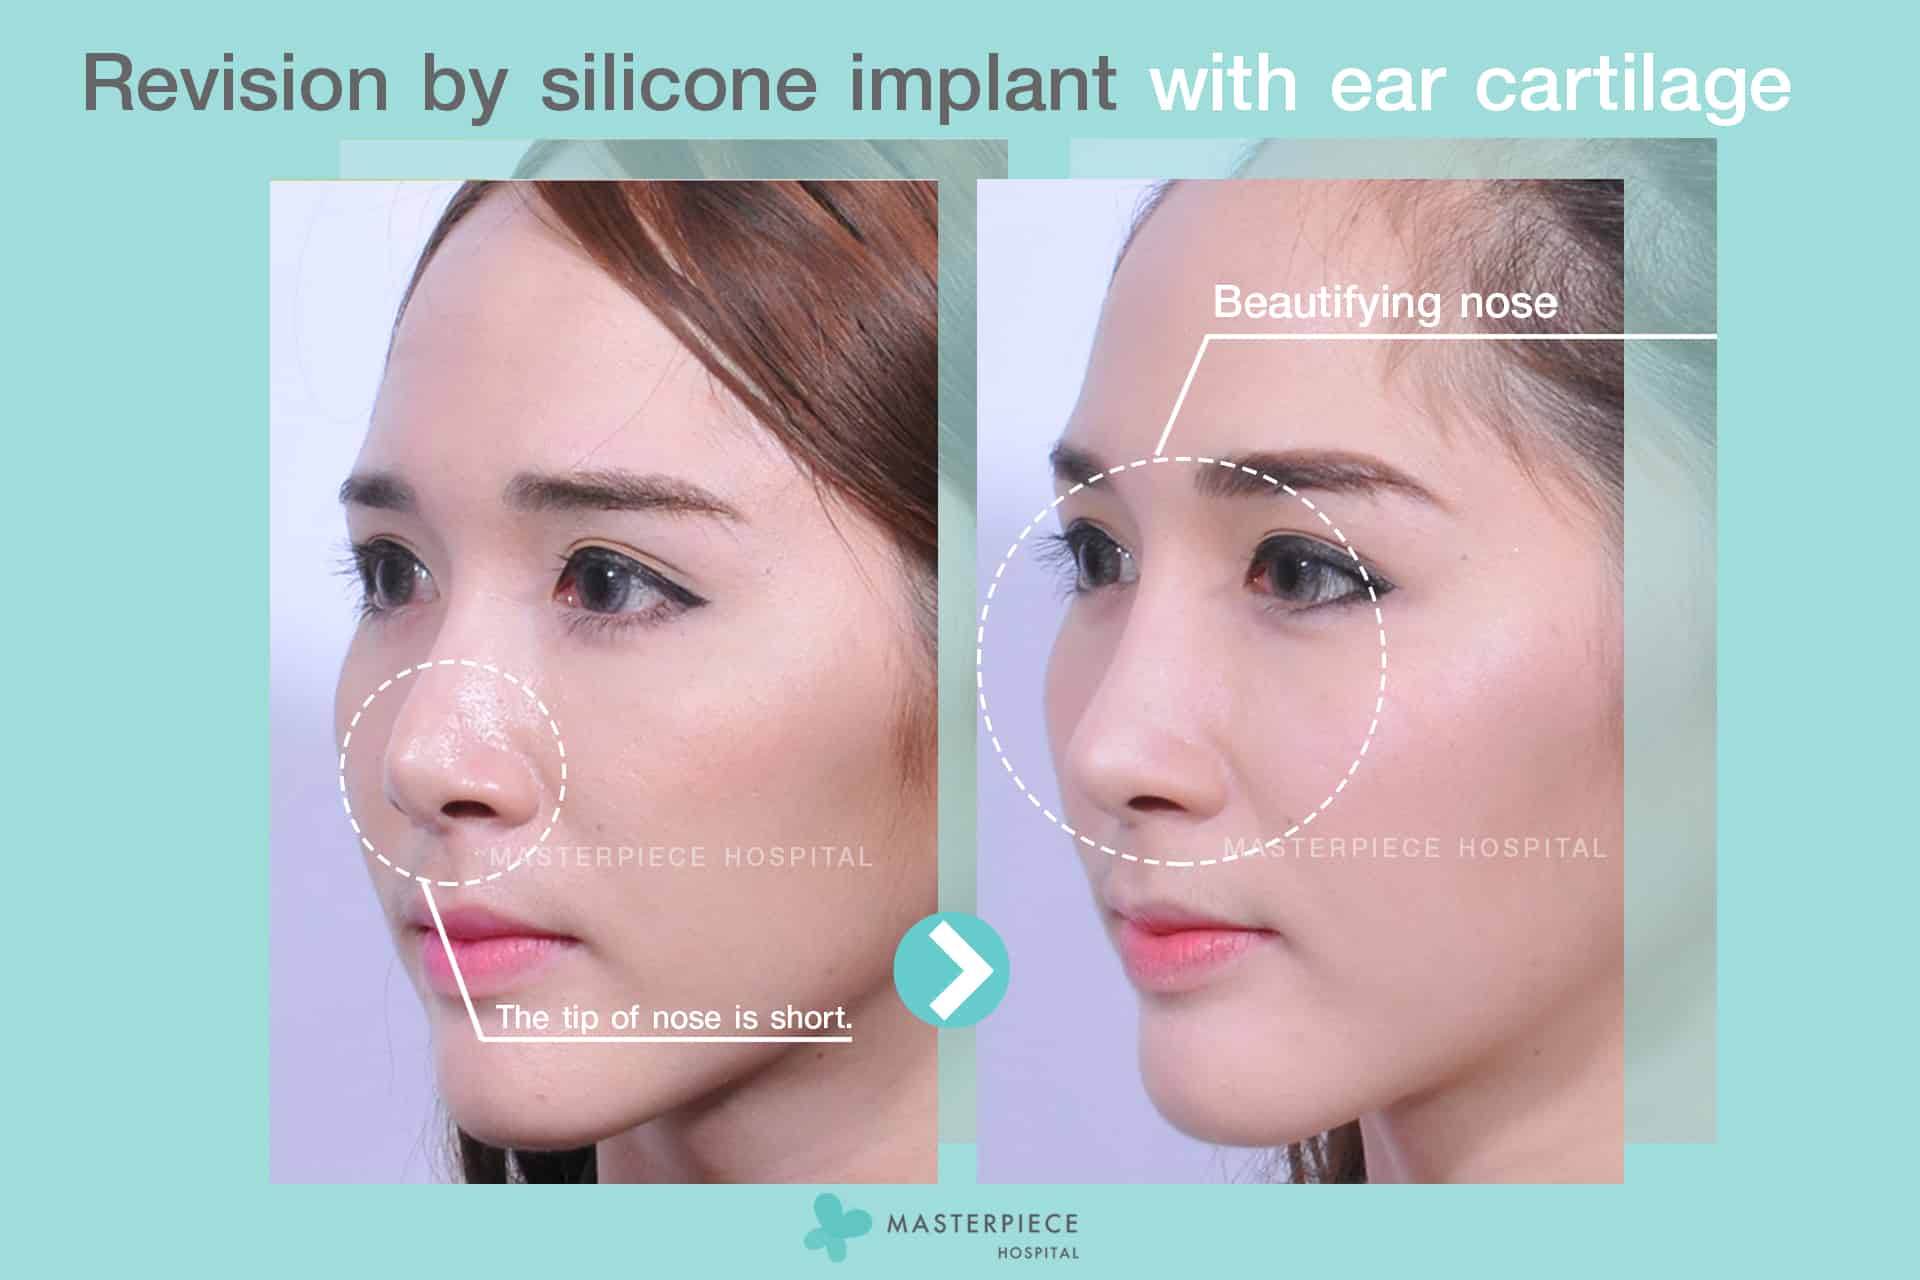 Revision by silicone implant with ear cartilage